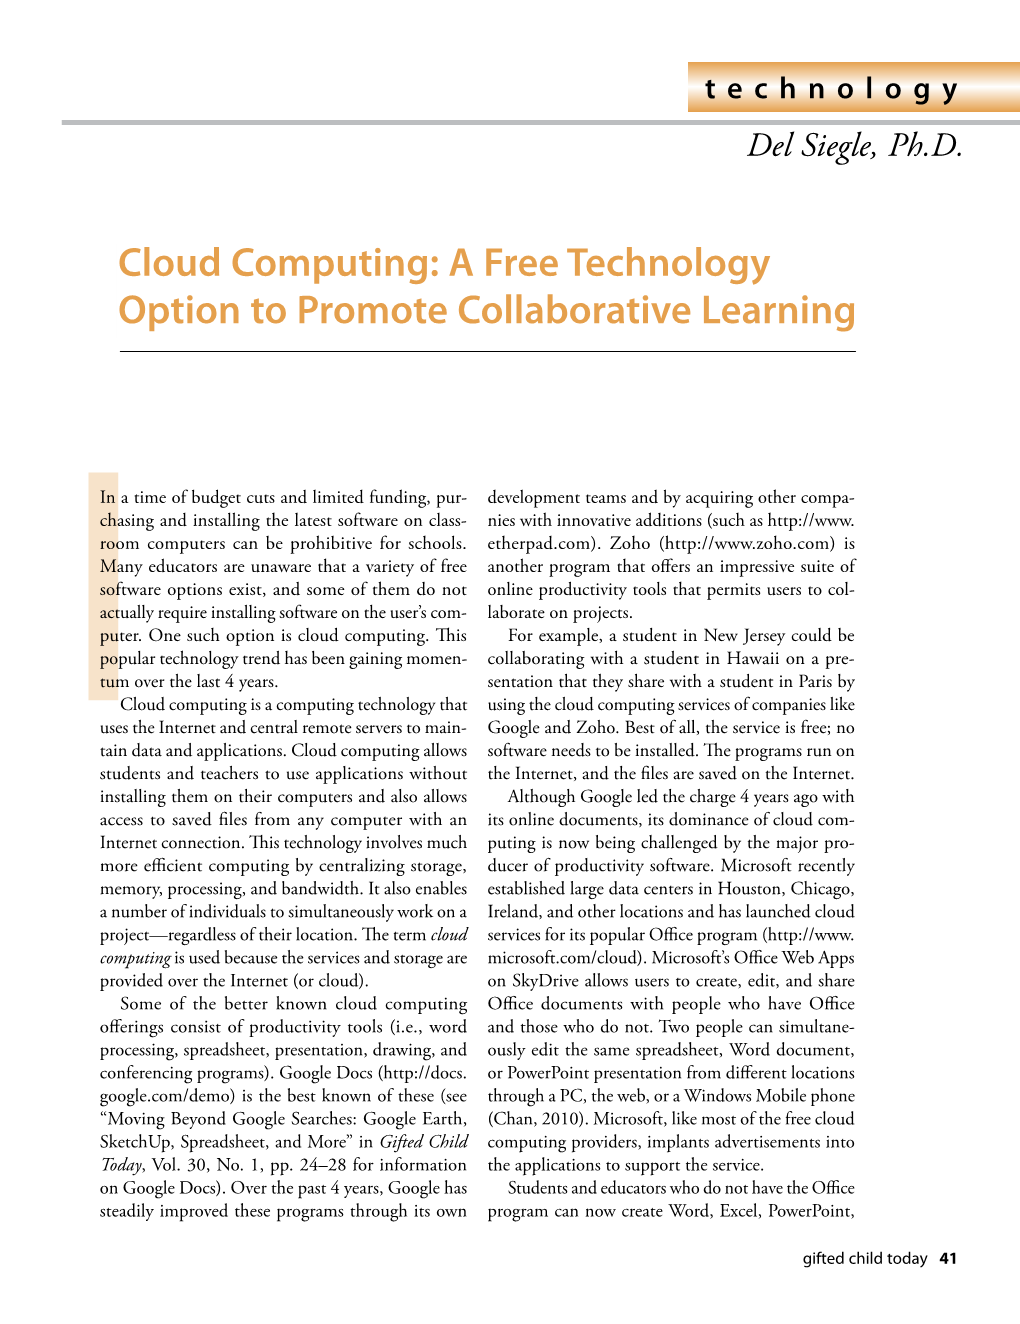 Cloud Computing: a Free Technology Option to Promote Collaborative Learning